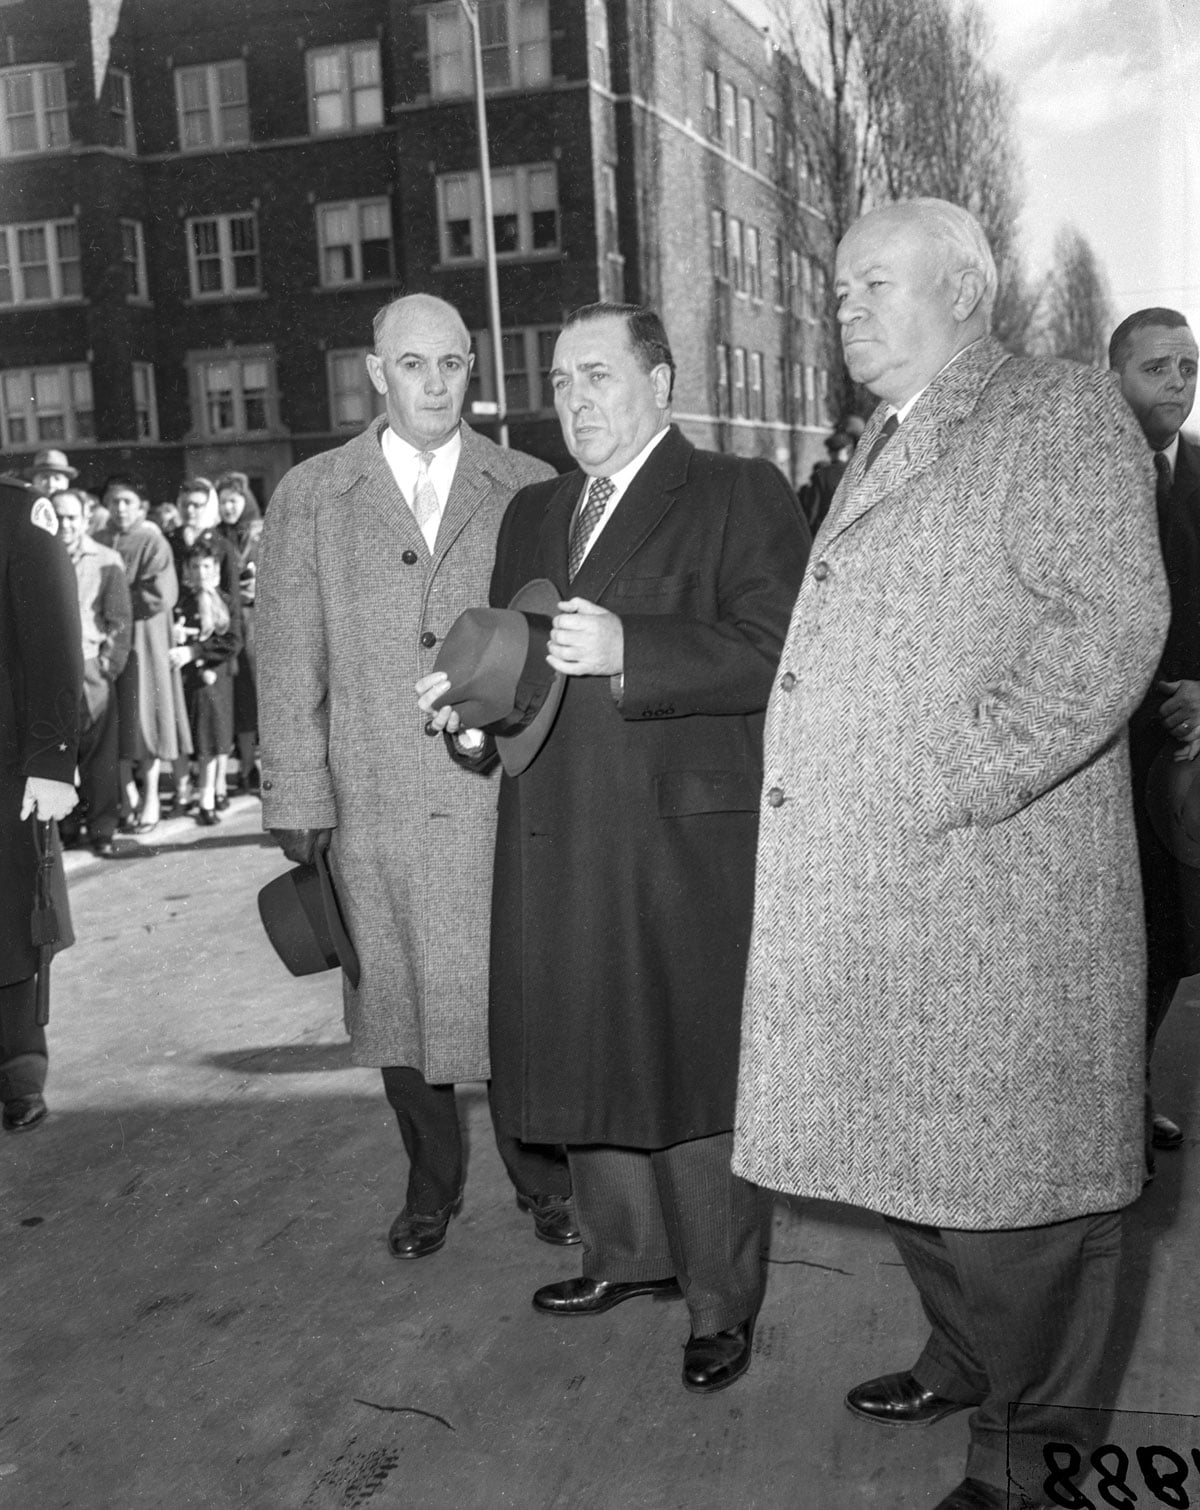 Mayor Richard J. Daley arrives at the scene of the fire